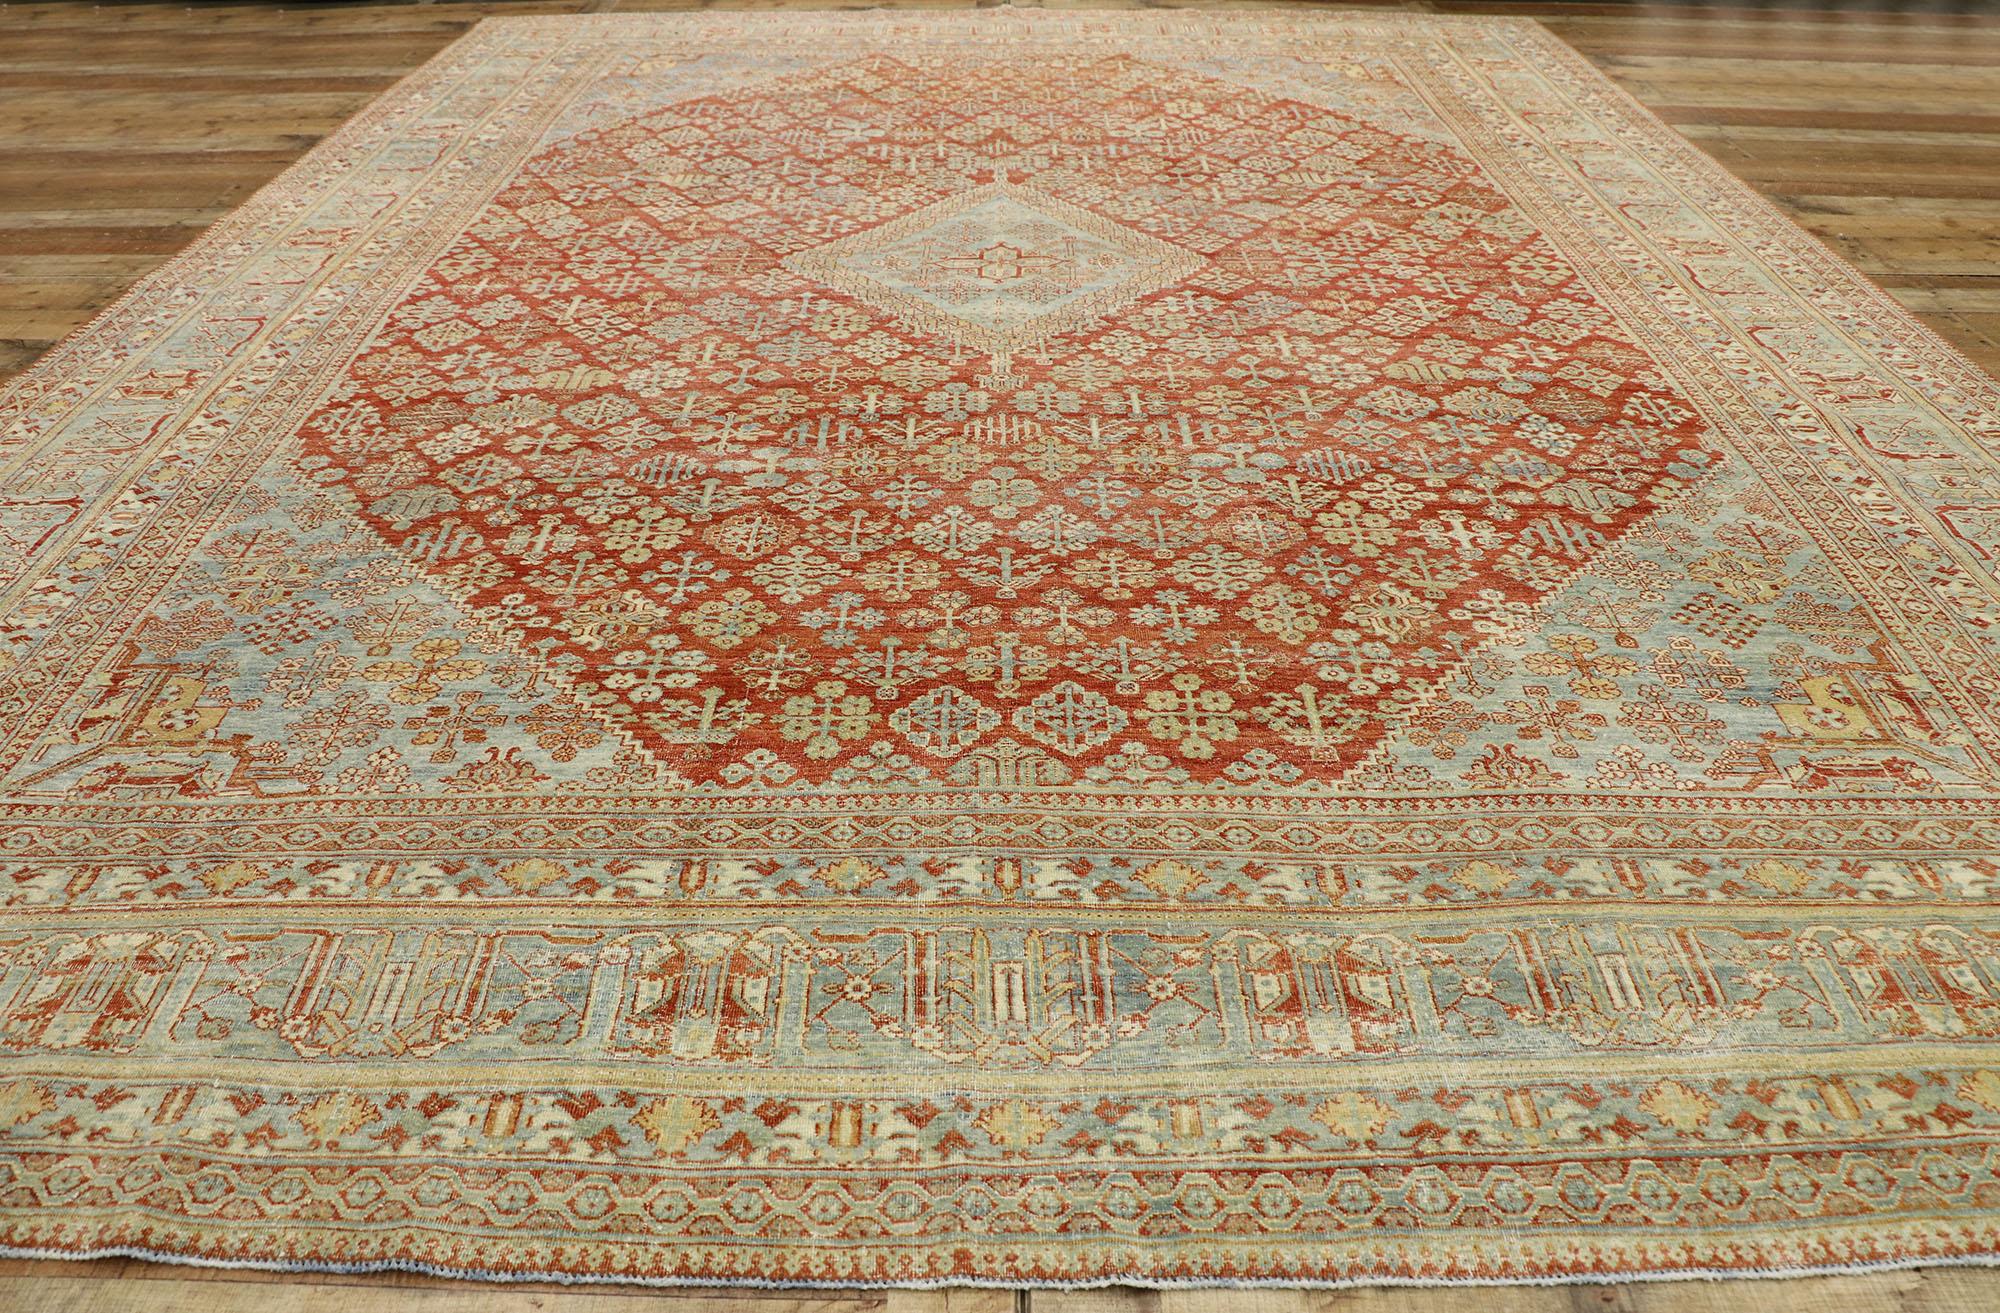 Distressed Antique Persian Joshegan Rug with Modern Rustic English Style For Sale 1